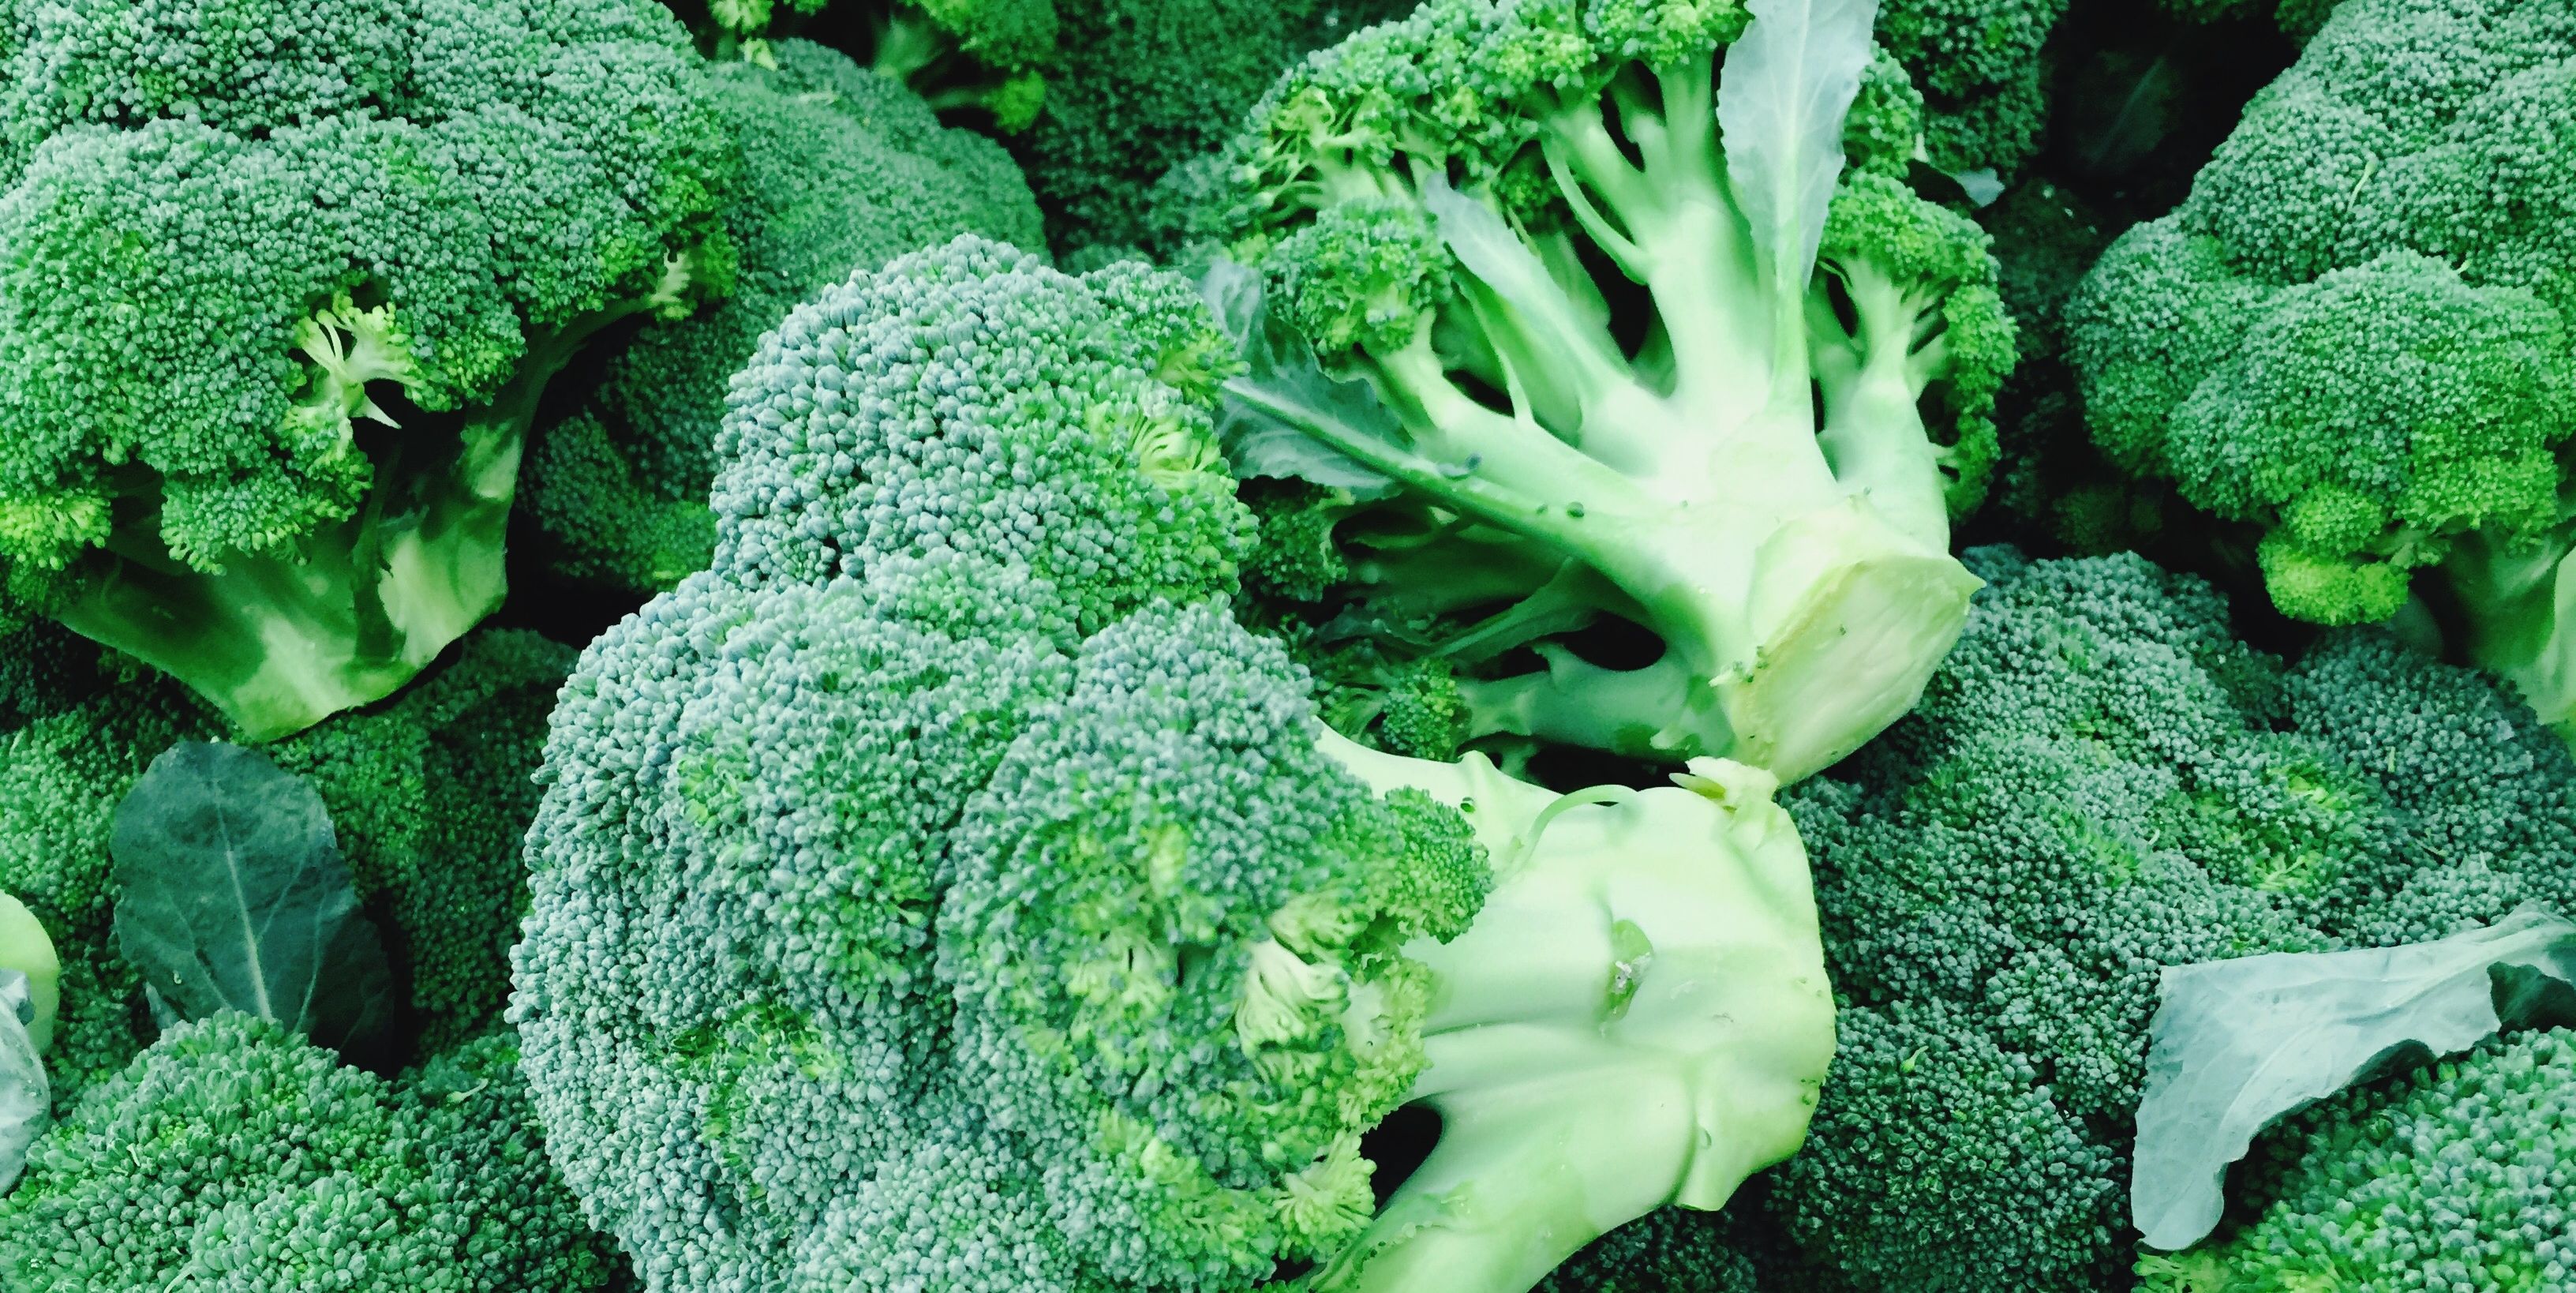 6 Tips for Growing Broccoli This Fall - How to Plant Broccoli